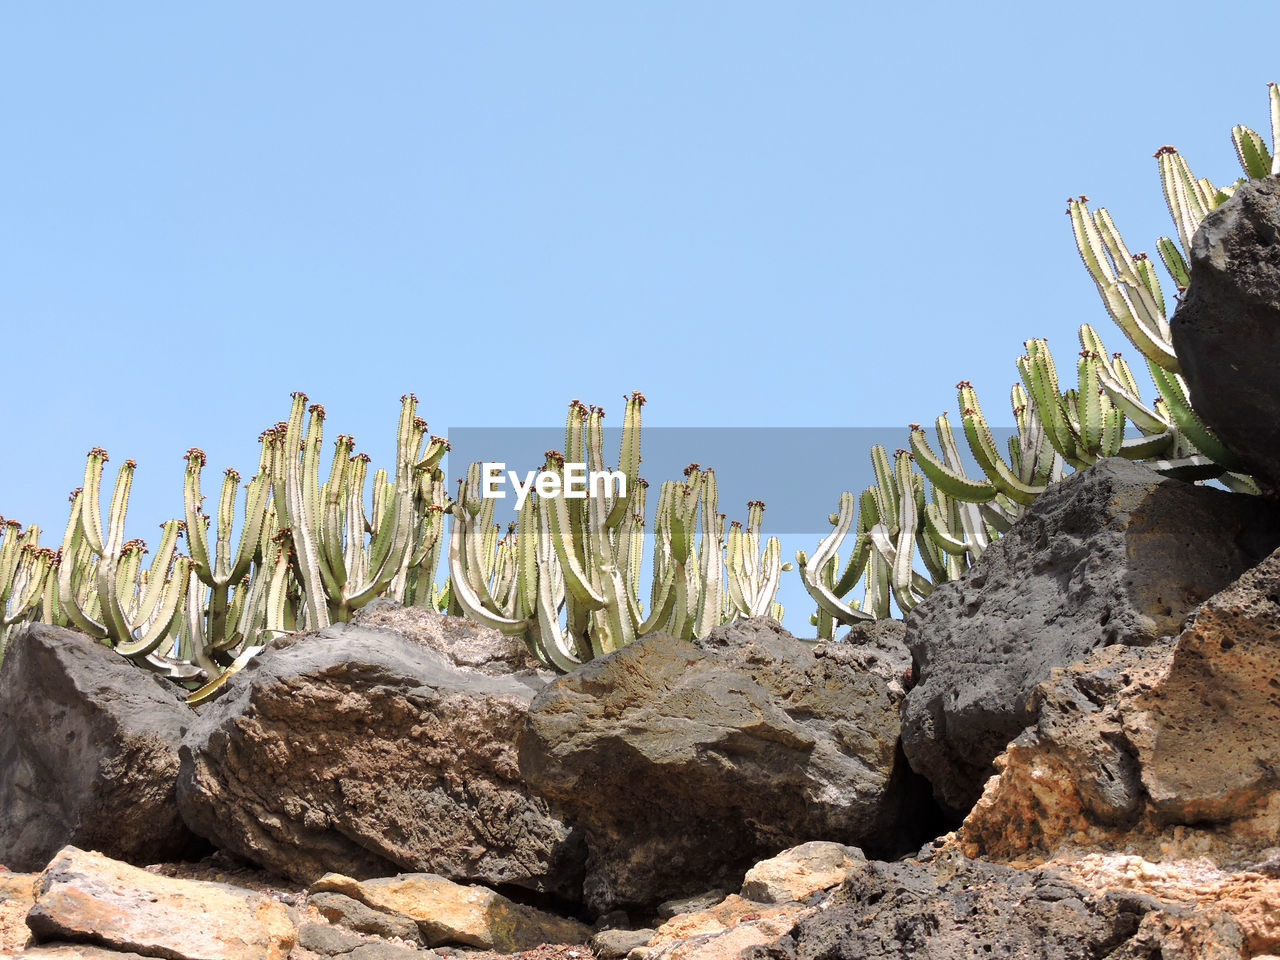 Cactus growing on rock against clear blue sky